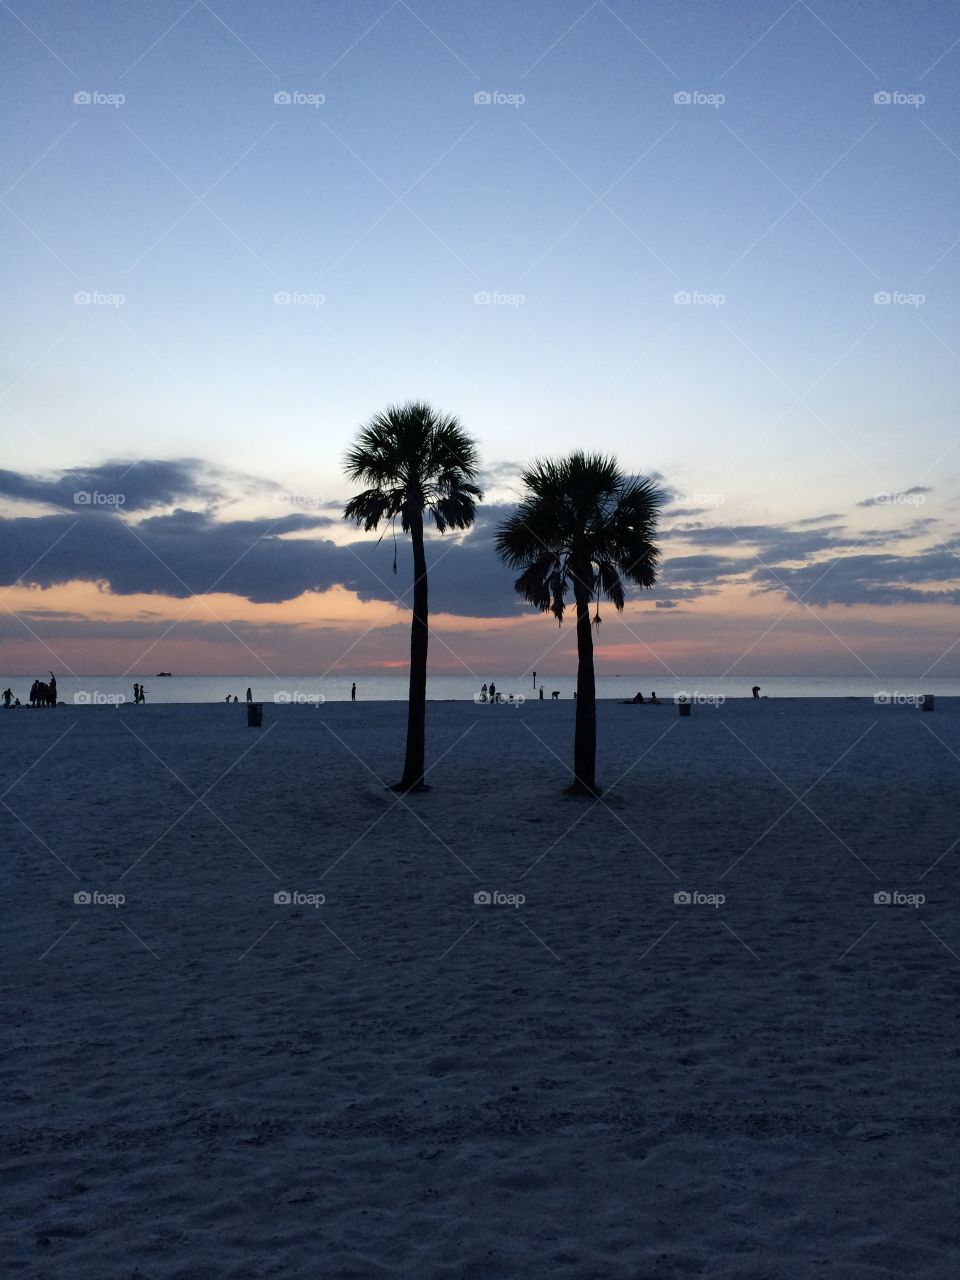 Clearwater Beach. Palm trees at sunset